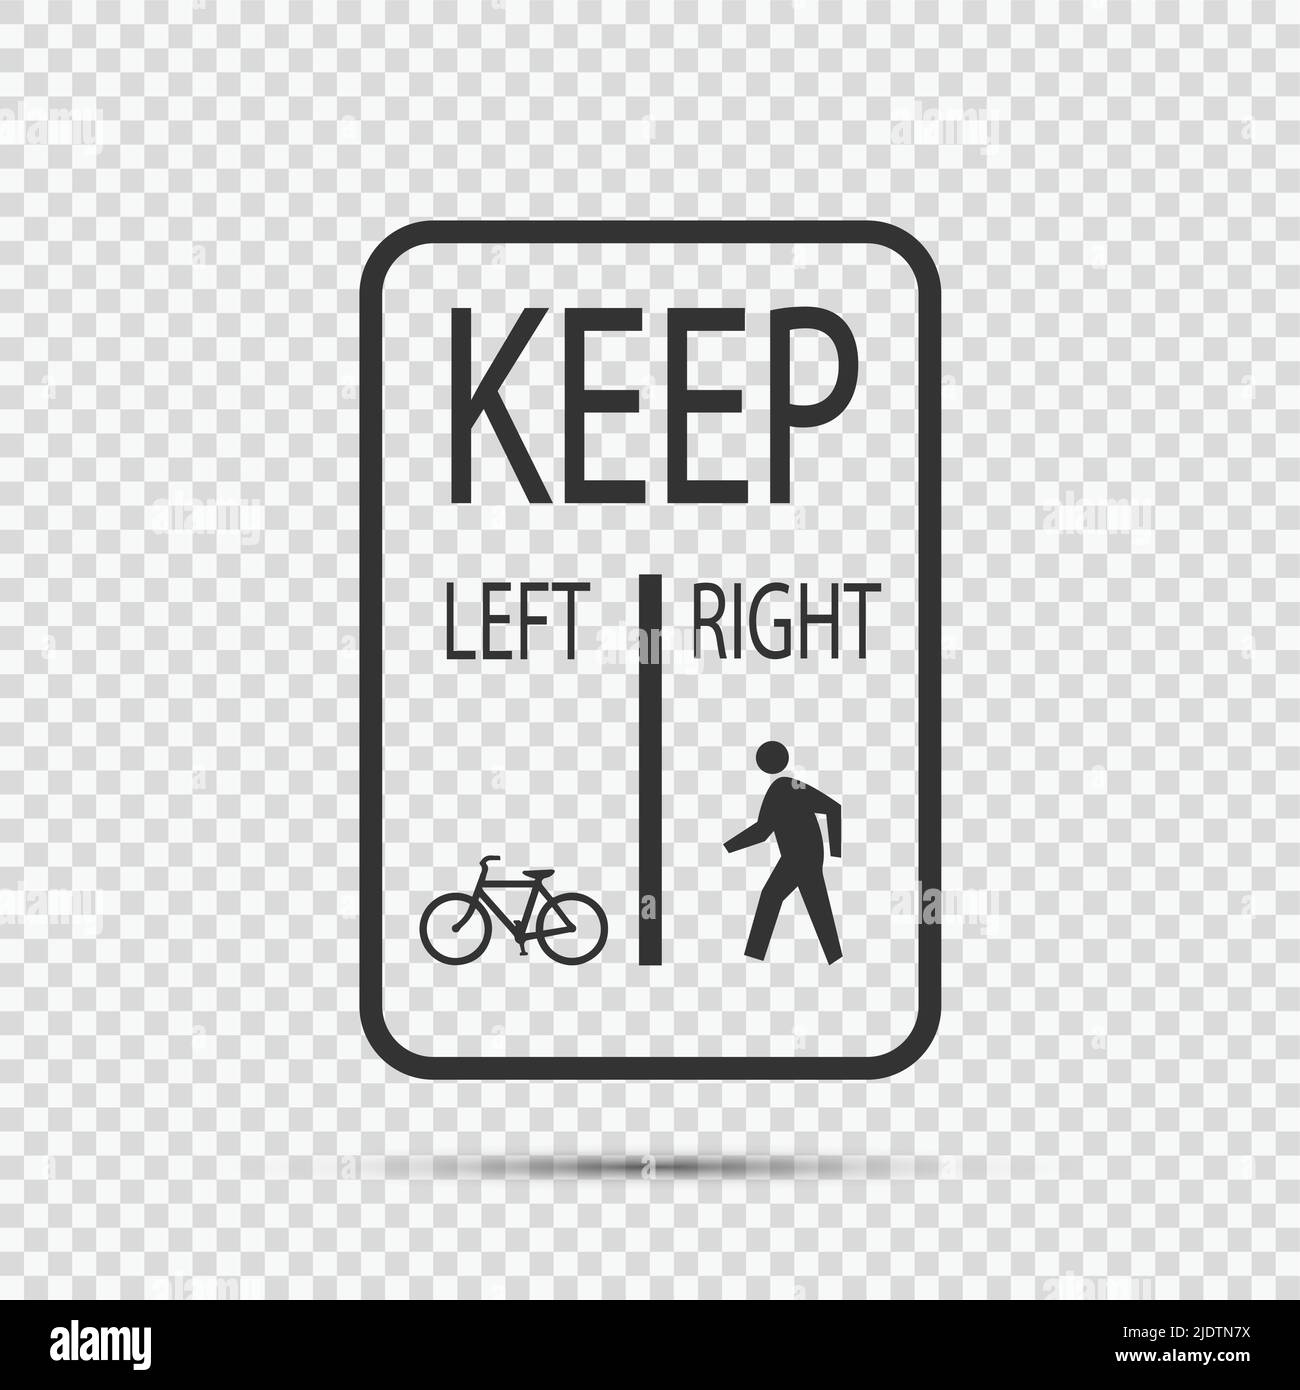 Bicycles Keep Left Pedestrians Keep Right Sign on transparent background,vector illustration Stock Vector